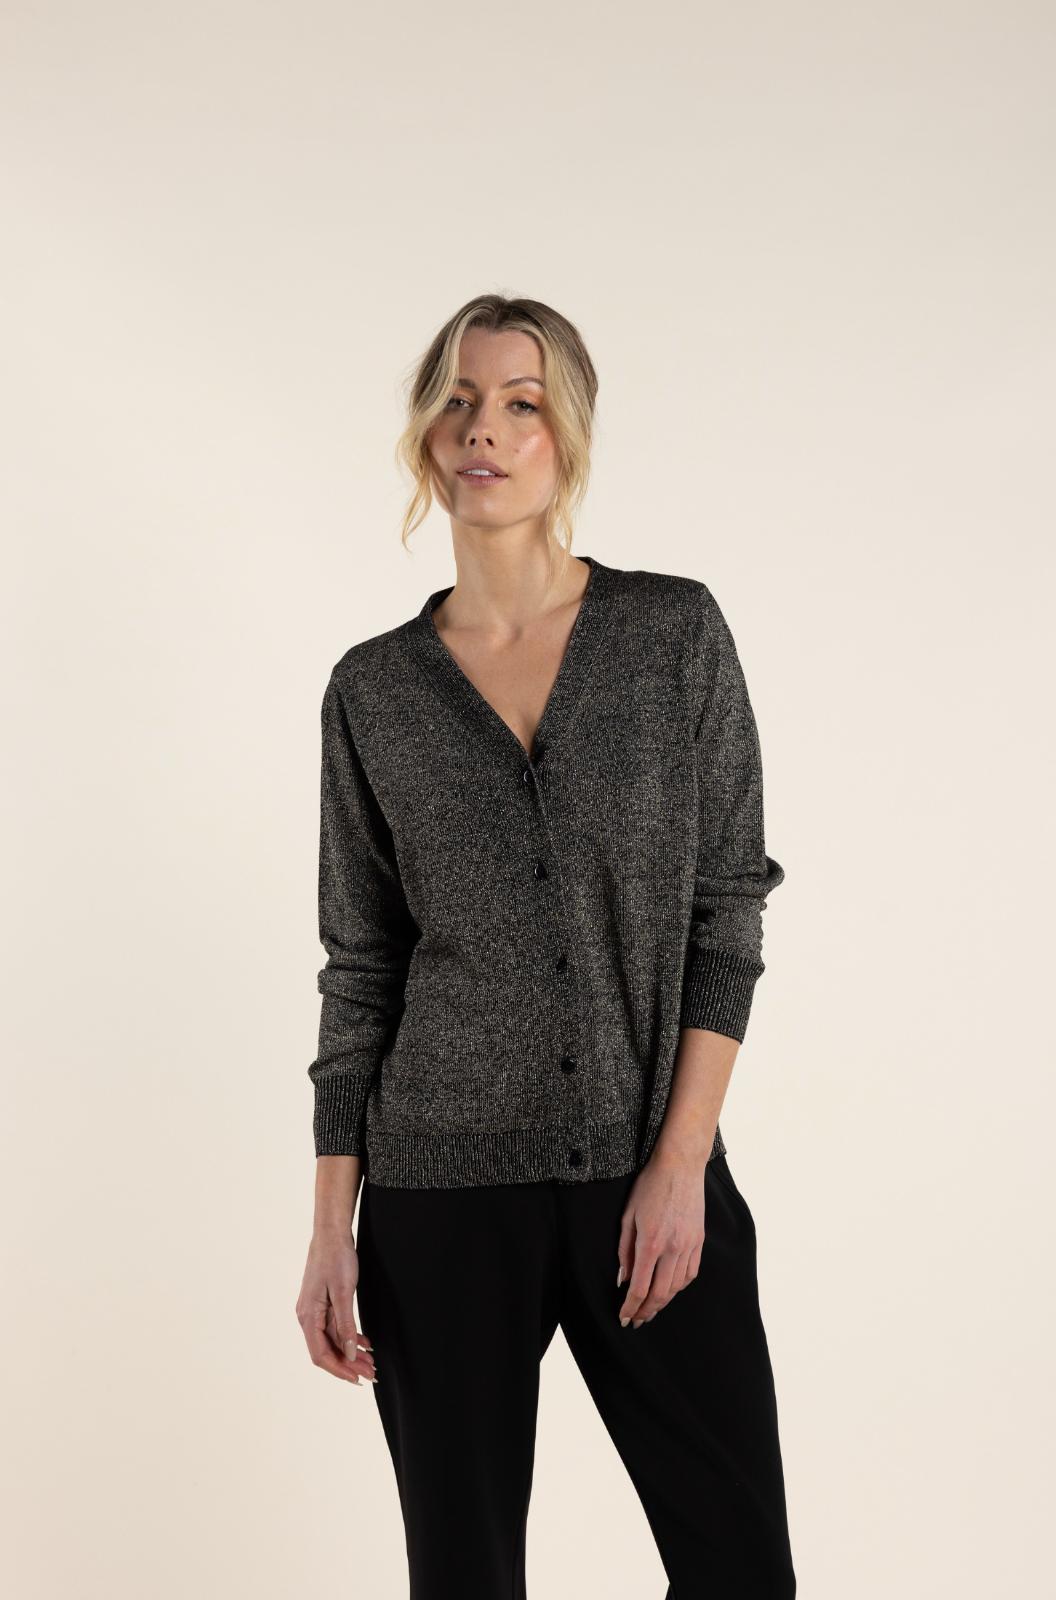 Two-T's Clothing Lurex Cardigan in Black